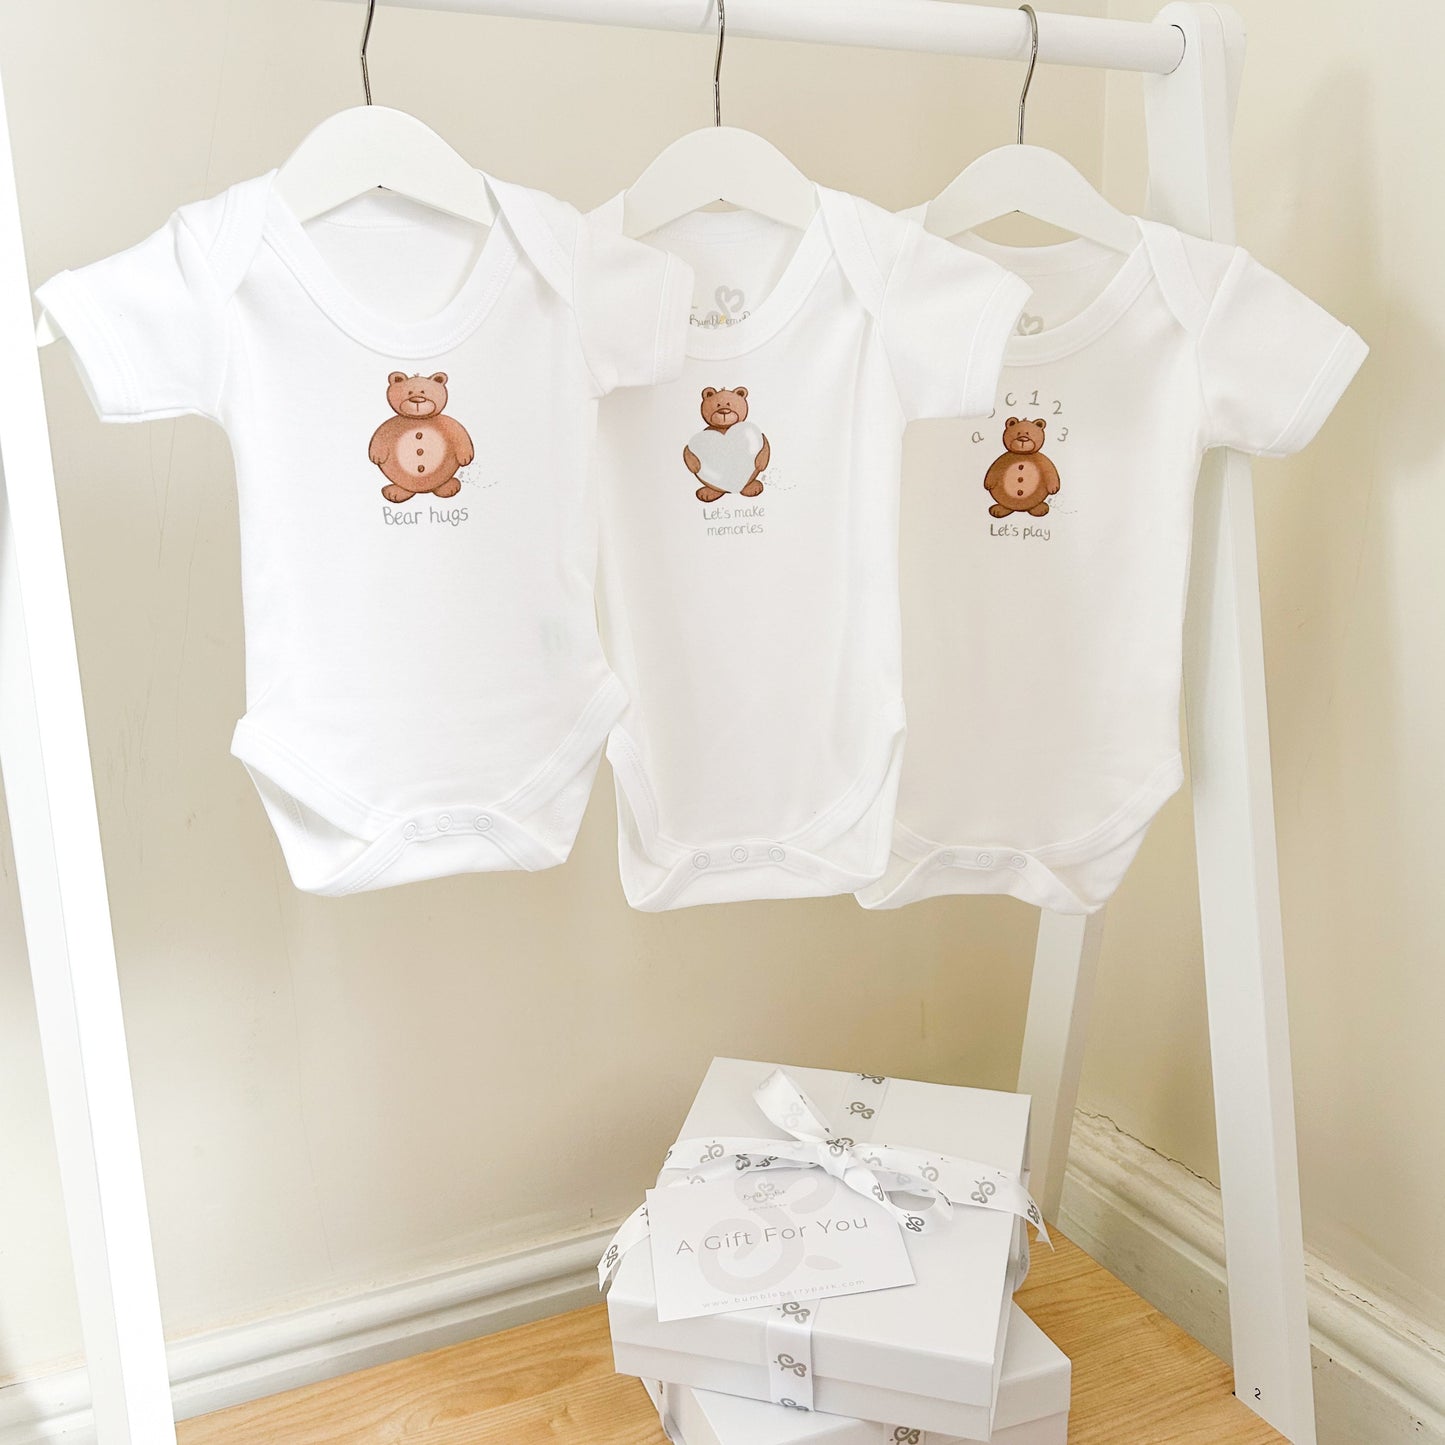 set of 3 baby bodysuits with teddy bear designs and "bear hugs" "let's make memories" and "Let's Play" inspirational quotes